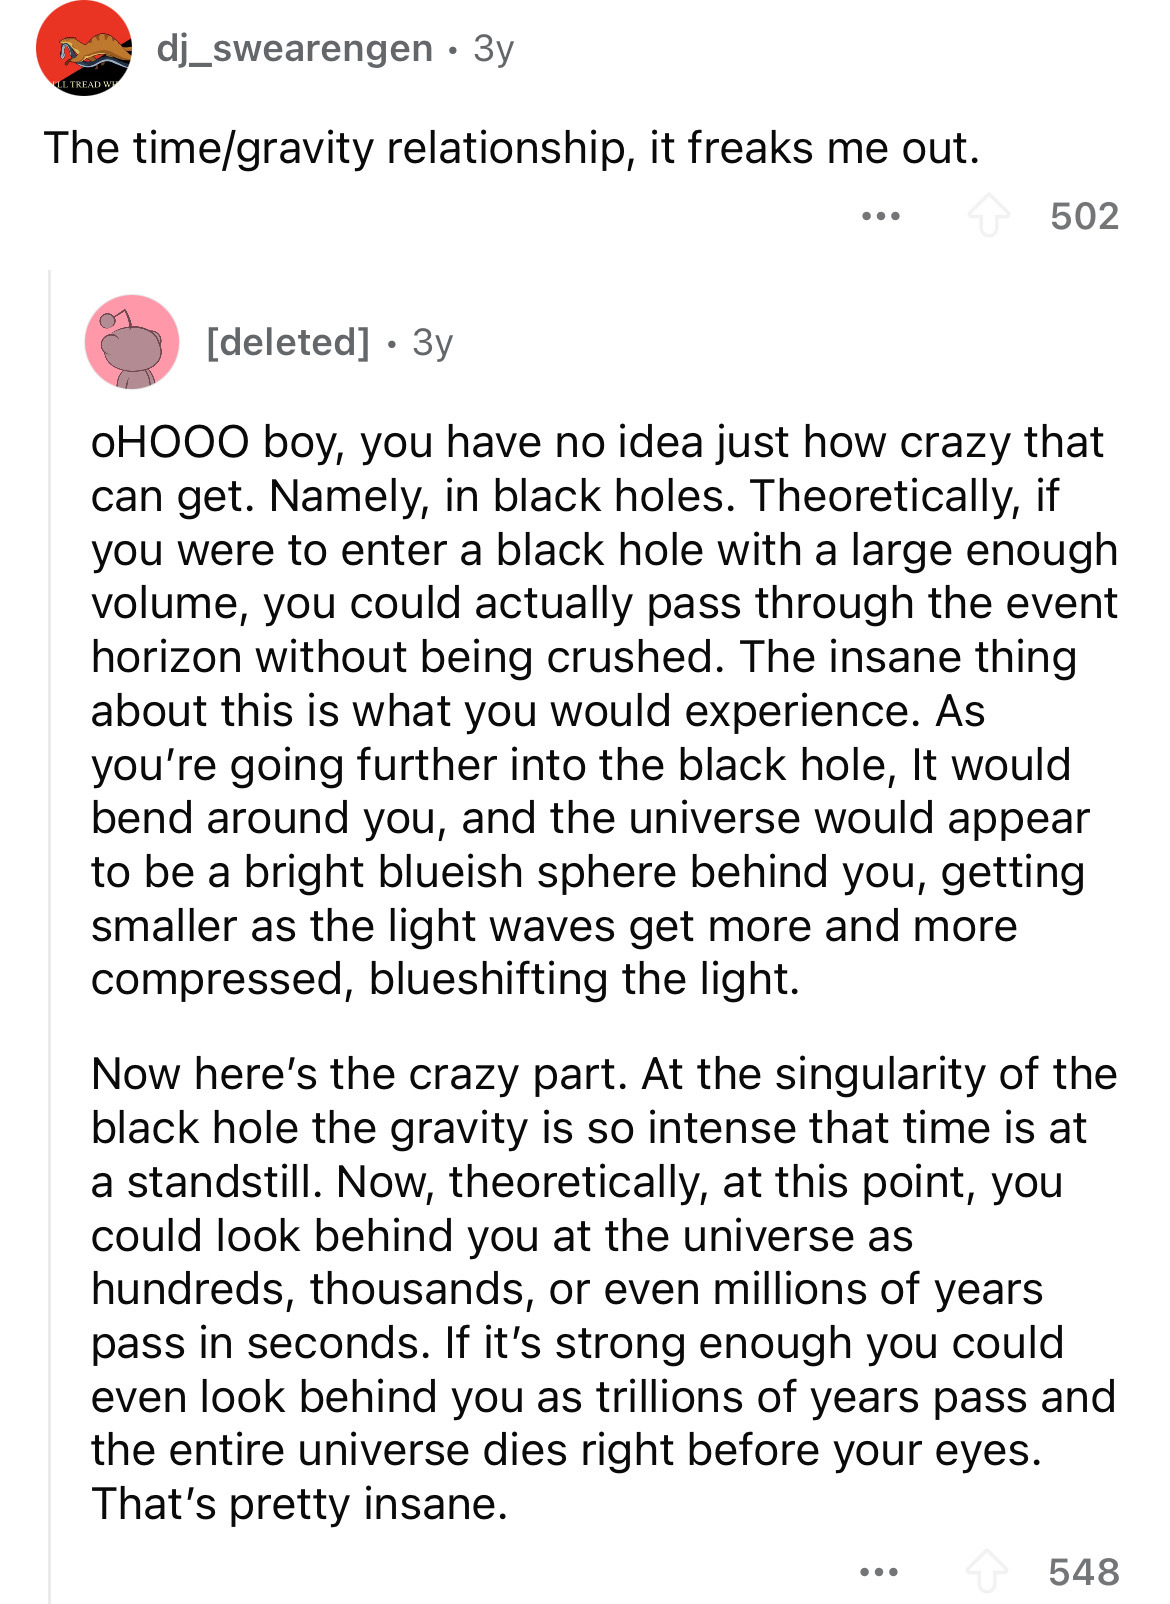 document - dj_swearengen. 3y The timegravity relationship, it freaks me out. 502 deleted 3y Ohooo boy, you have no idea just how crazy that can get. Namely, in black holes. Theoretically, if you were to enter a black hole with a large enough volume, you c